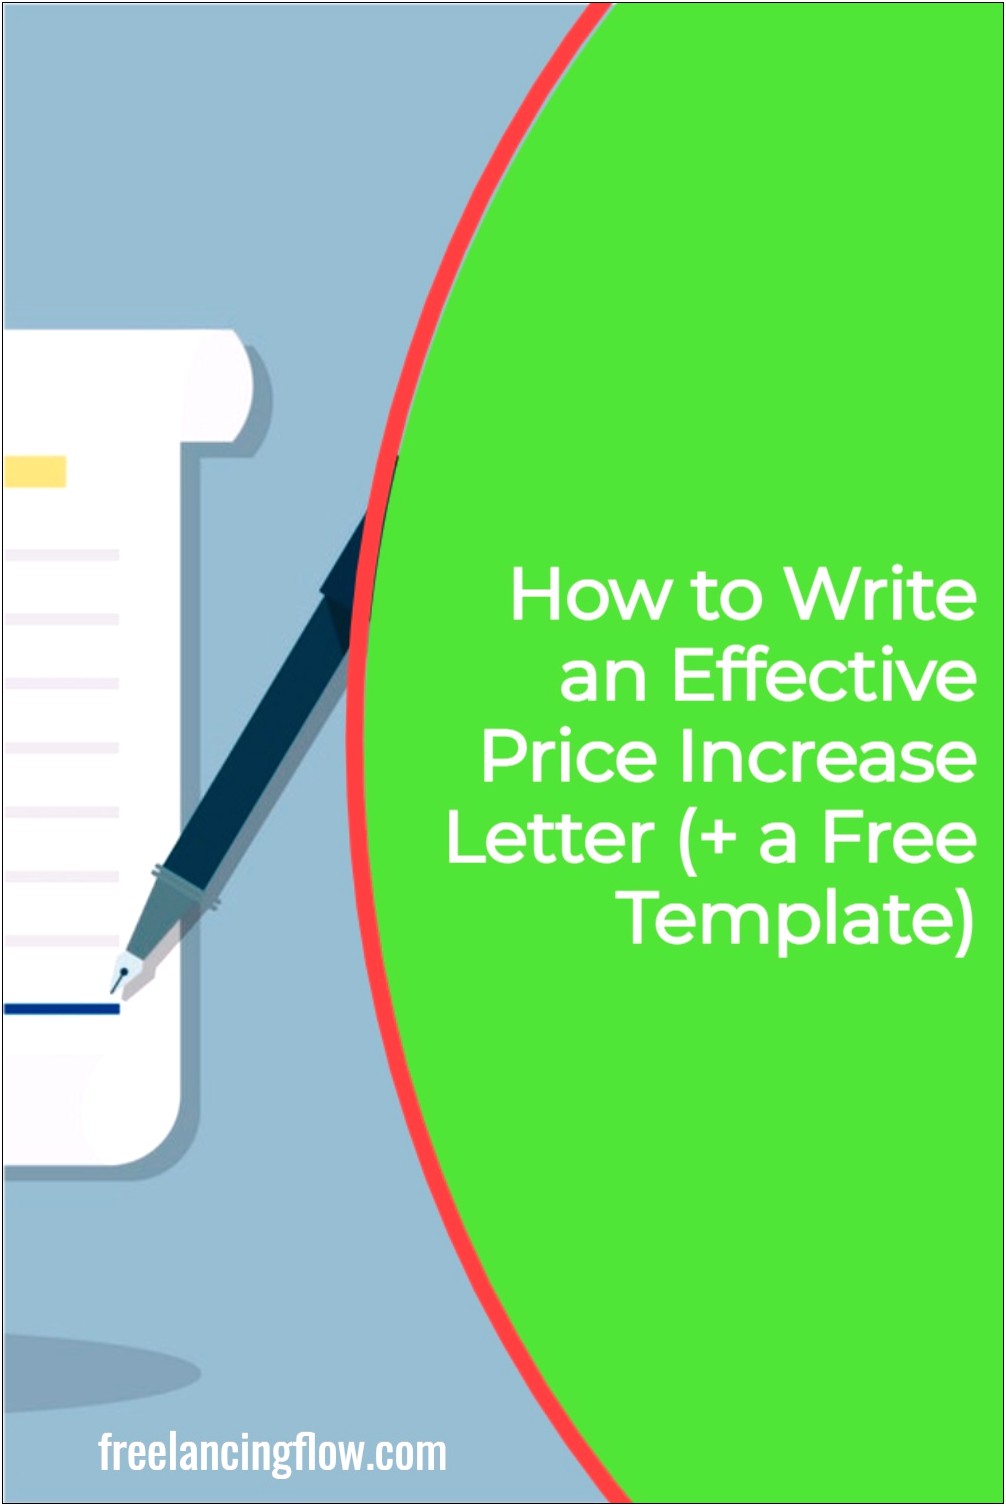 Free Letter Templates To Request Higher Fence